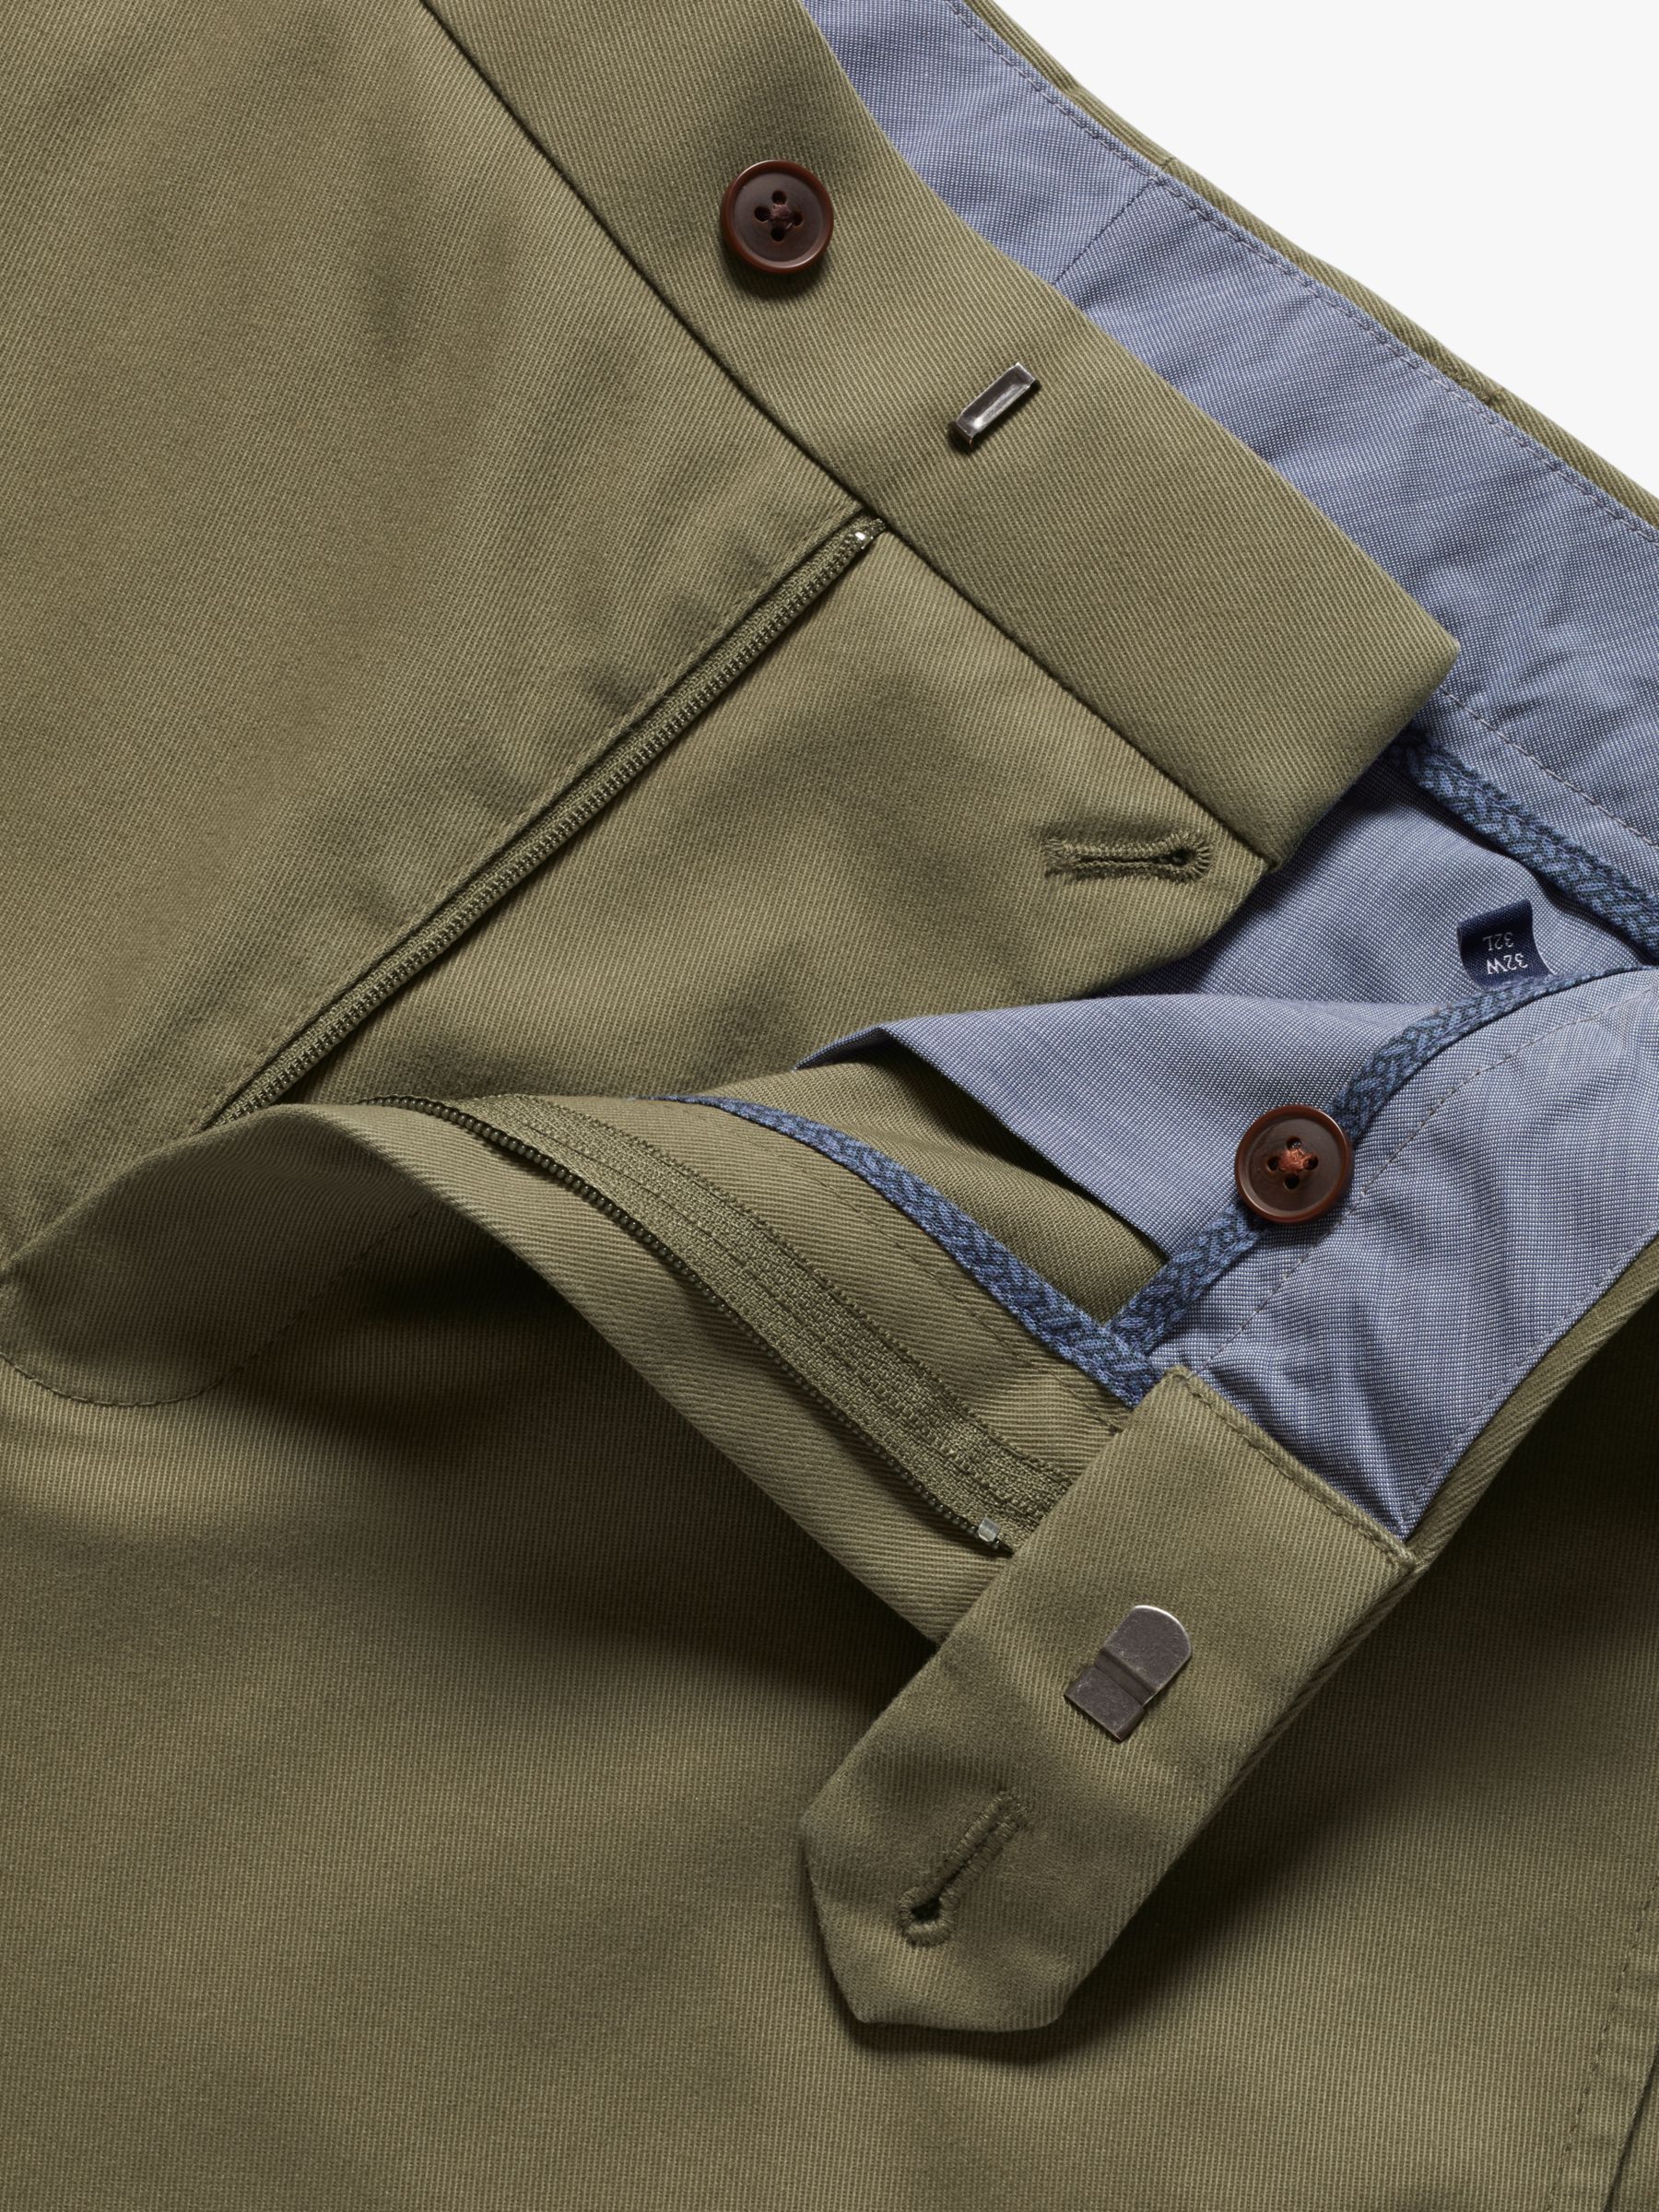 Charles Tyrwhitt Ultimate Non-Iron Slim Fit Chinos, Olive at John Lewis ...